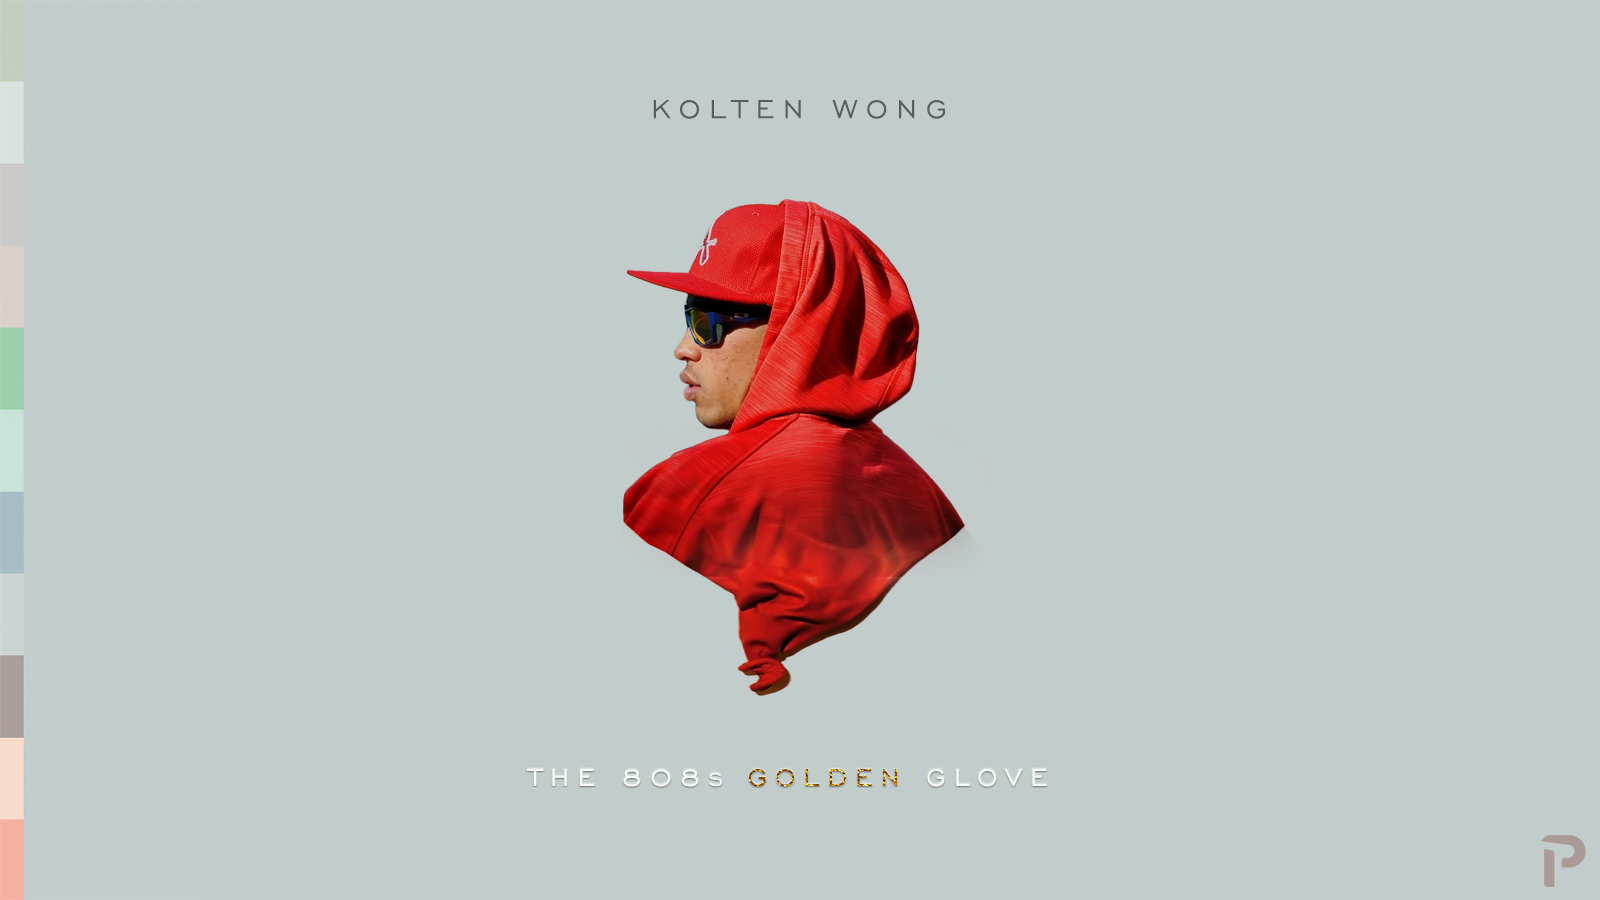 Seven years after Kolten Wong's mother Keala died of cancer, she's